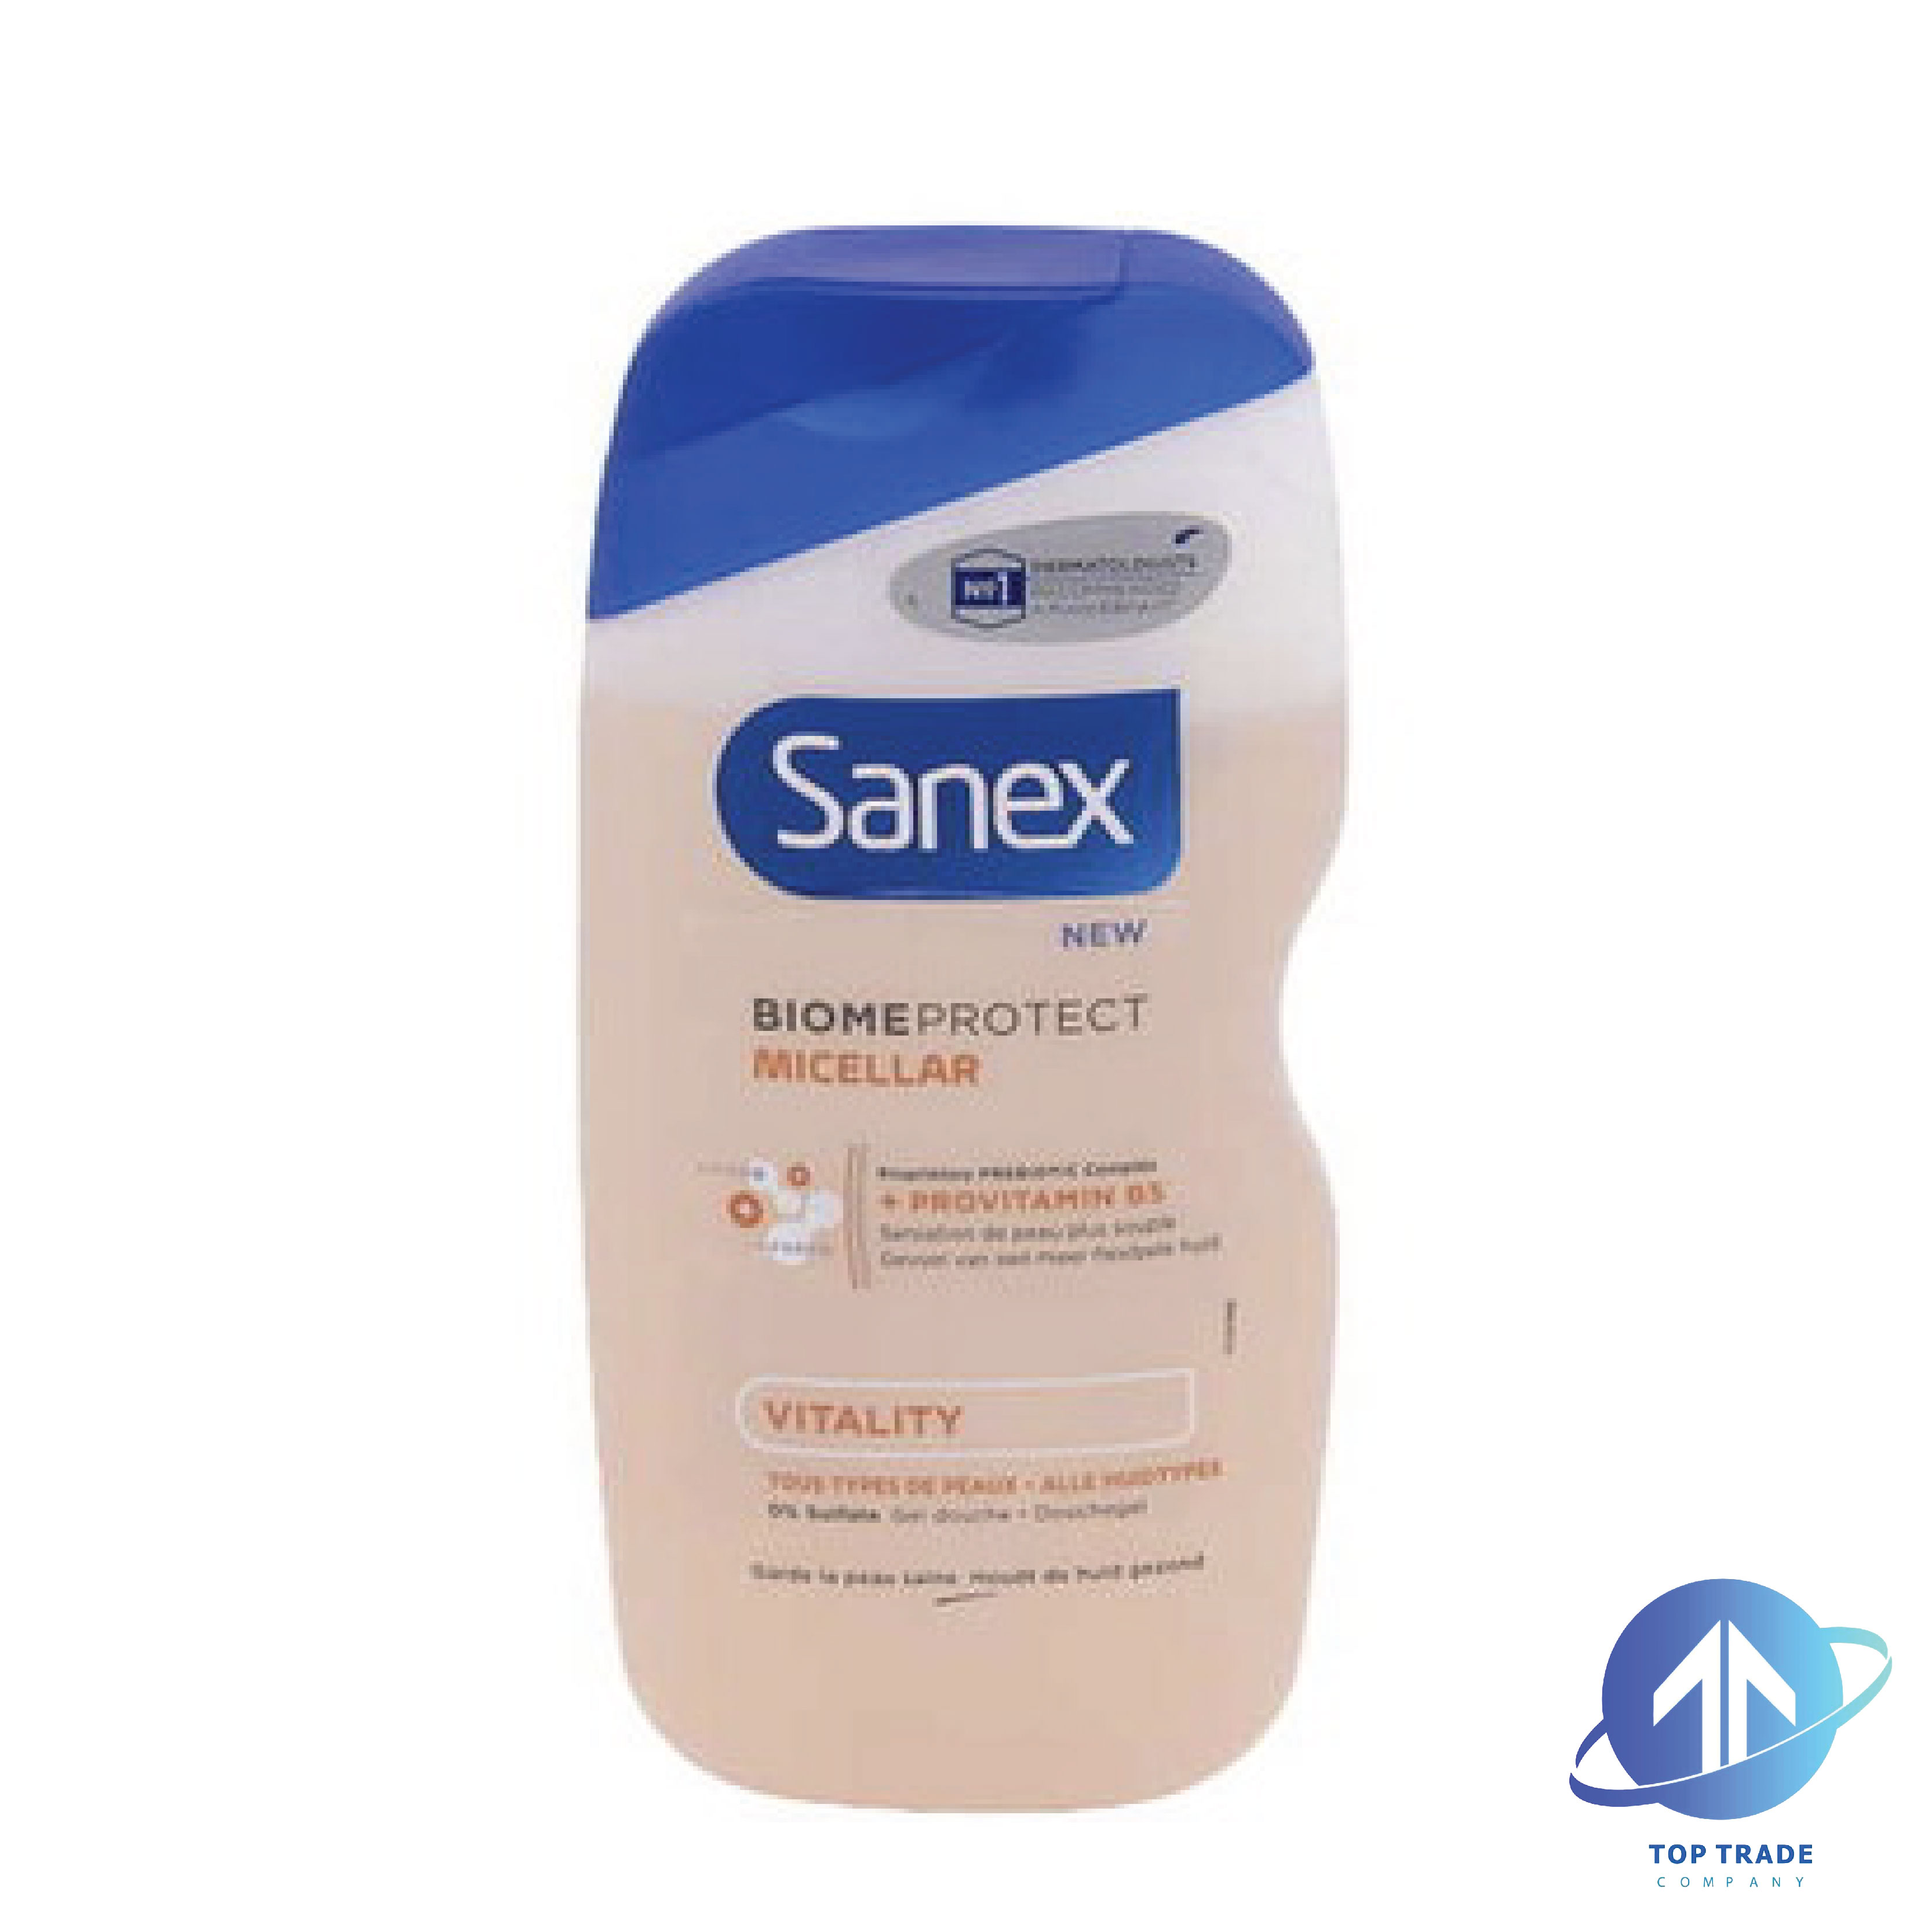 Sanex shower gel Biome Protect Micellar Vitality (duo-pack) unit price 400ml